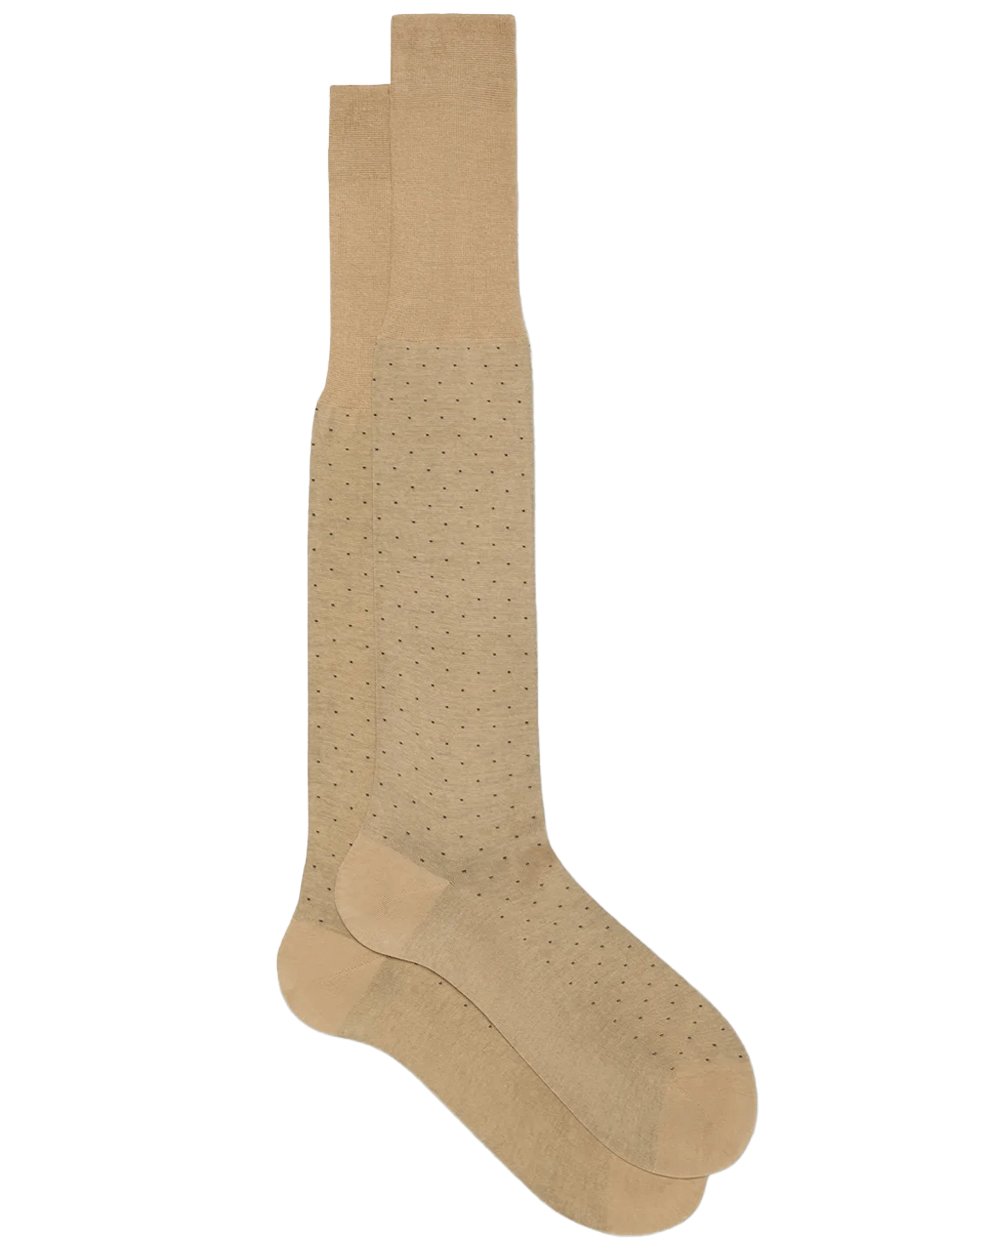 Dotted Over the Calf Socks in Tan